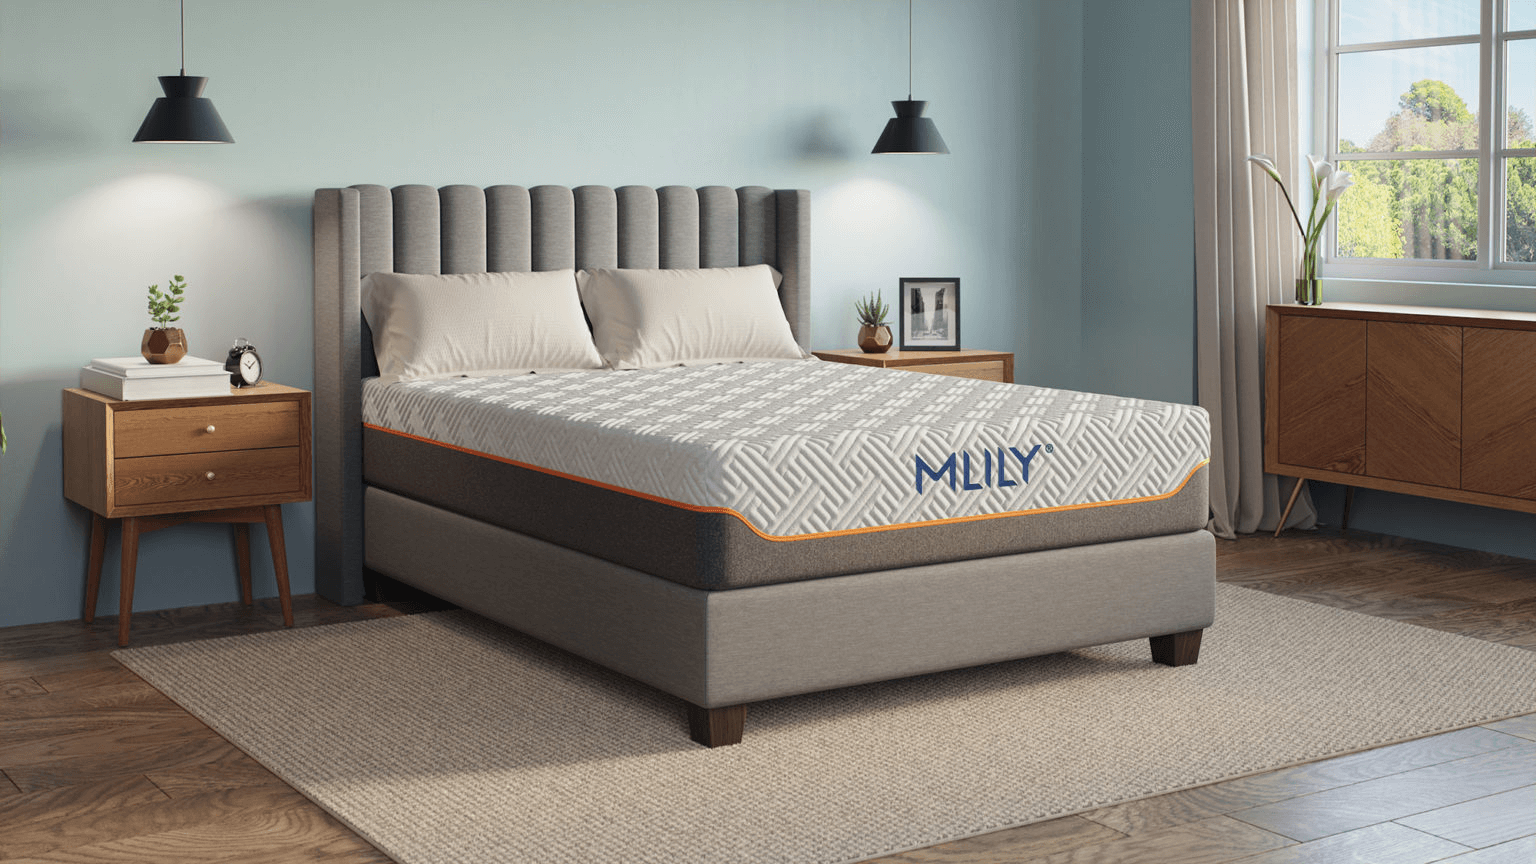 Mlily mainly focus on high-end mattress for luxury sleep